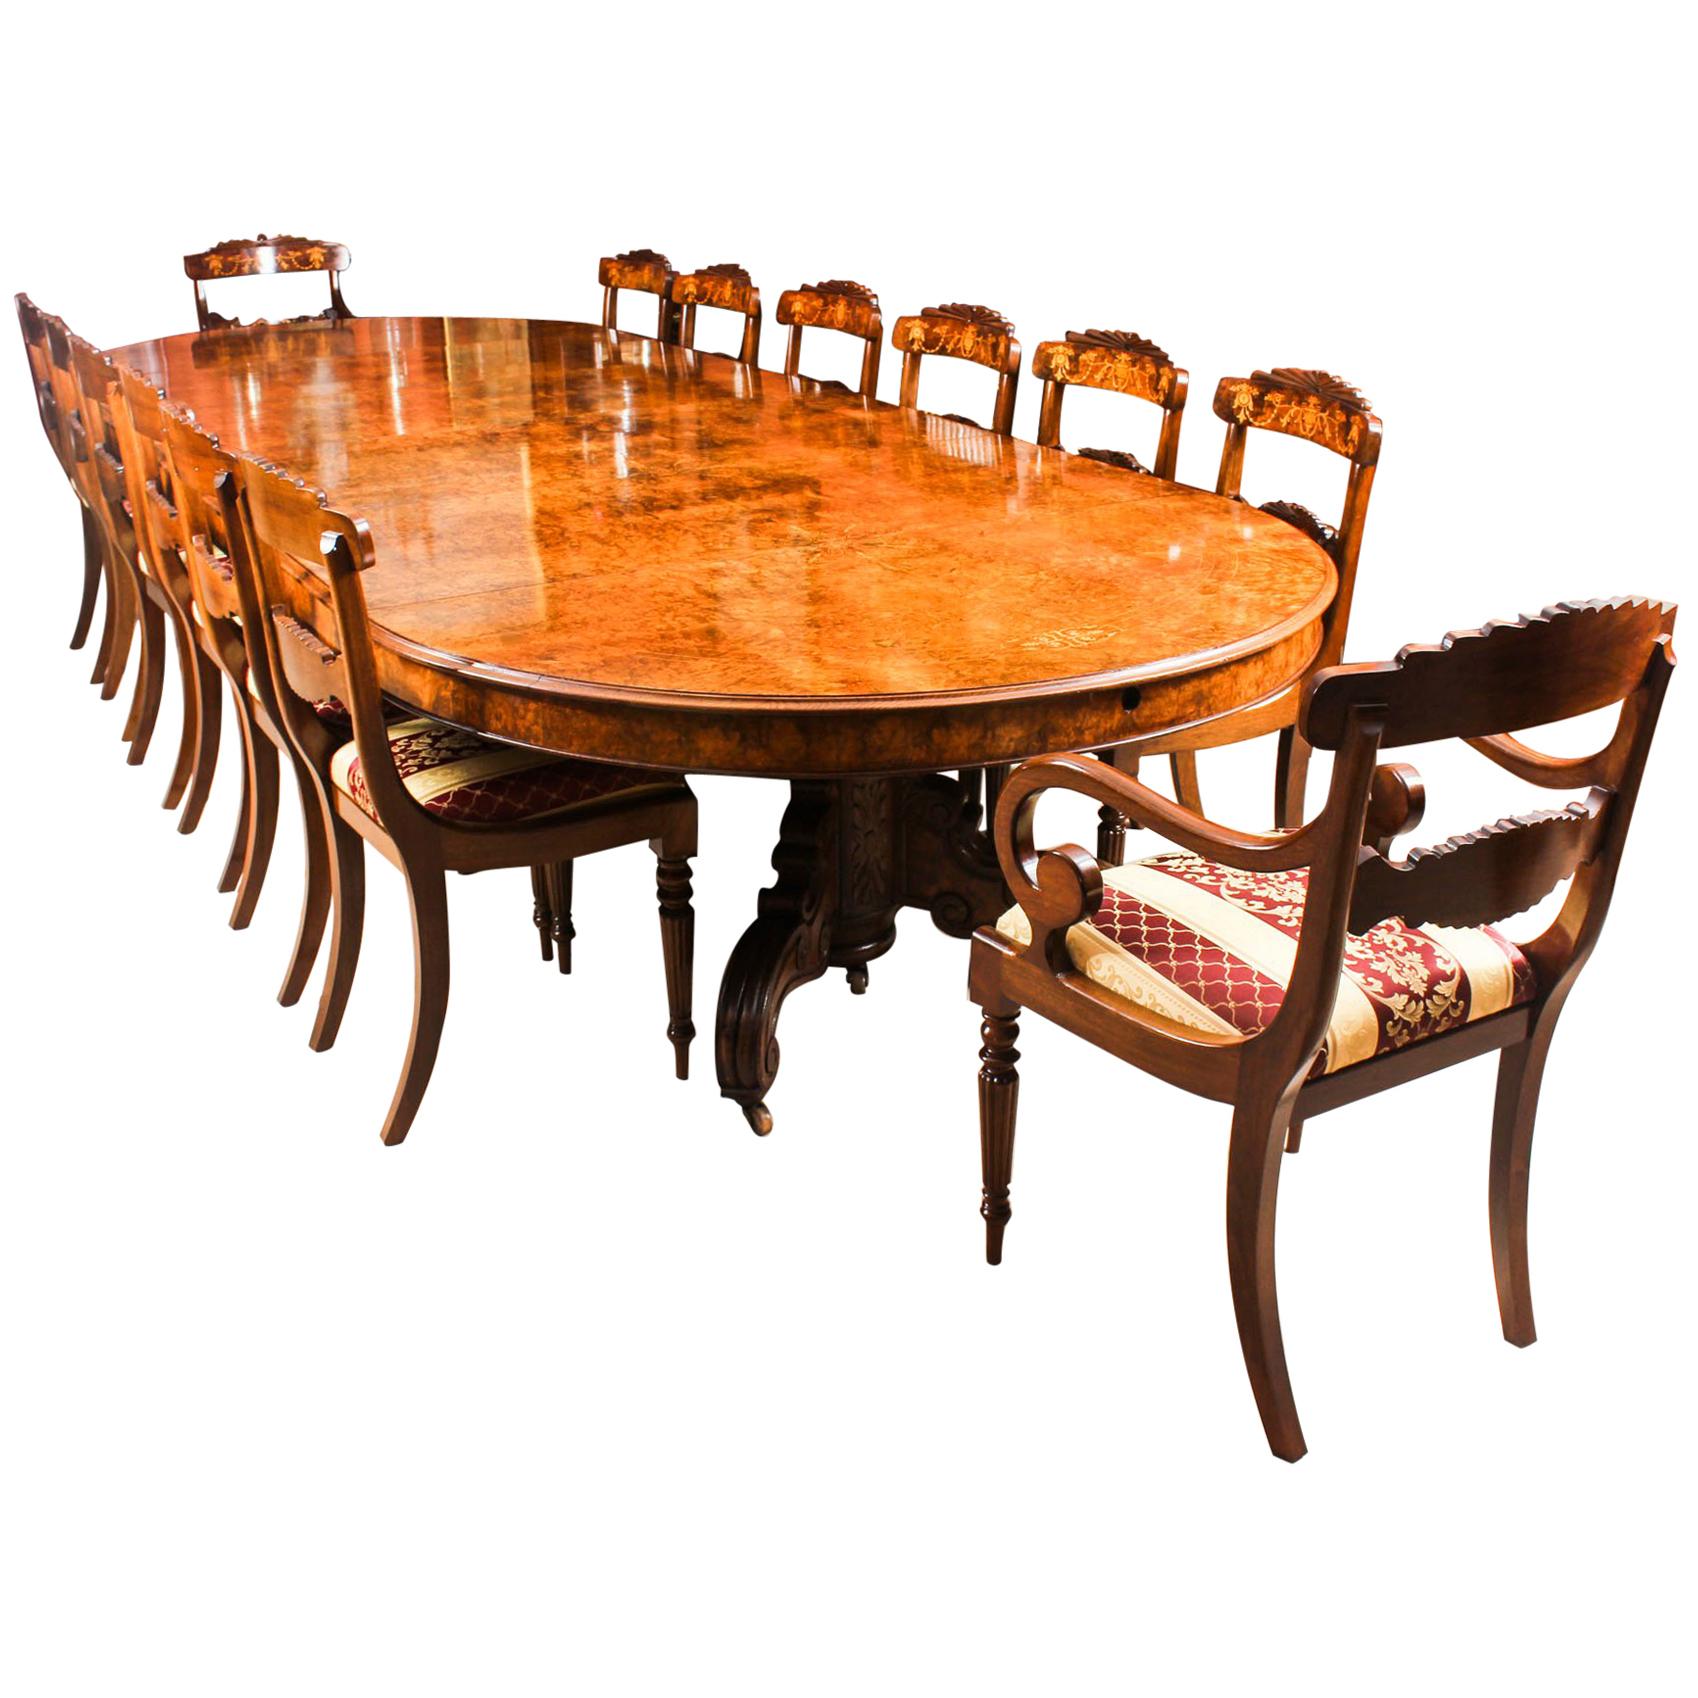 Antique Victorian Burr Marquetry Walnut Dining Table 19th Century and 14 Chairs